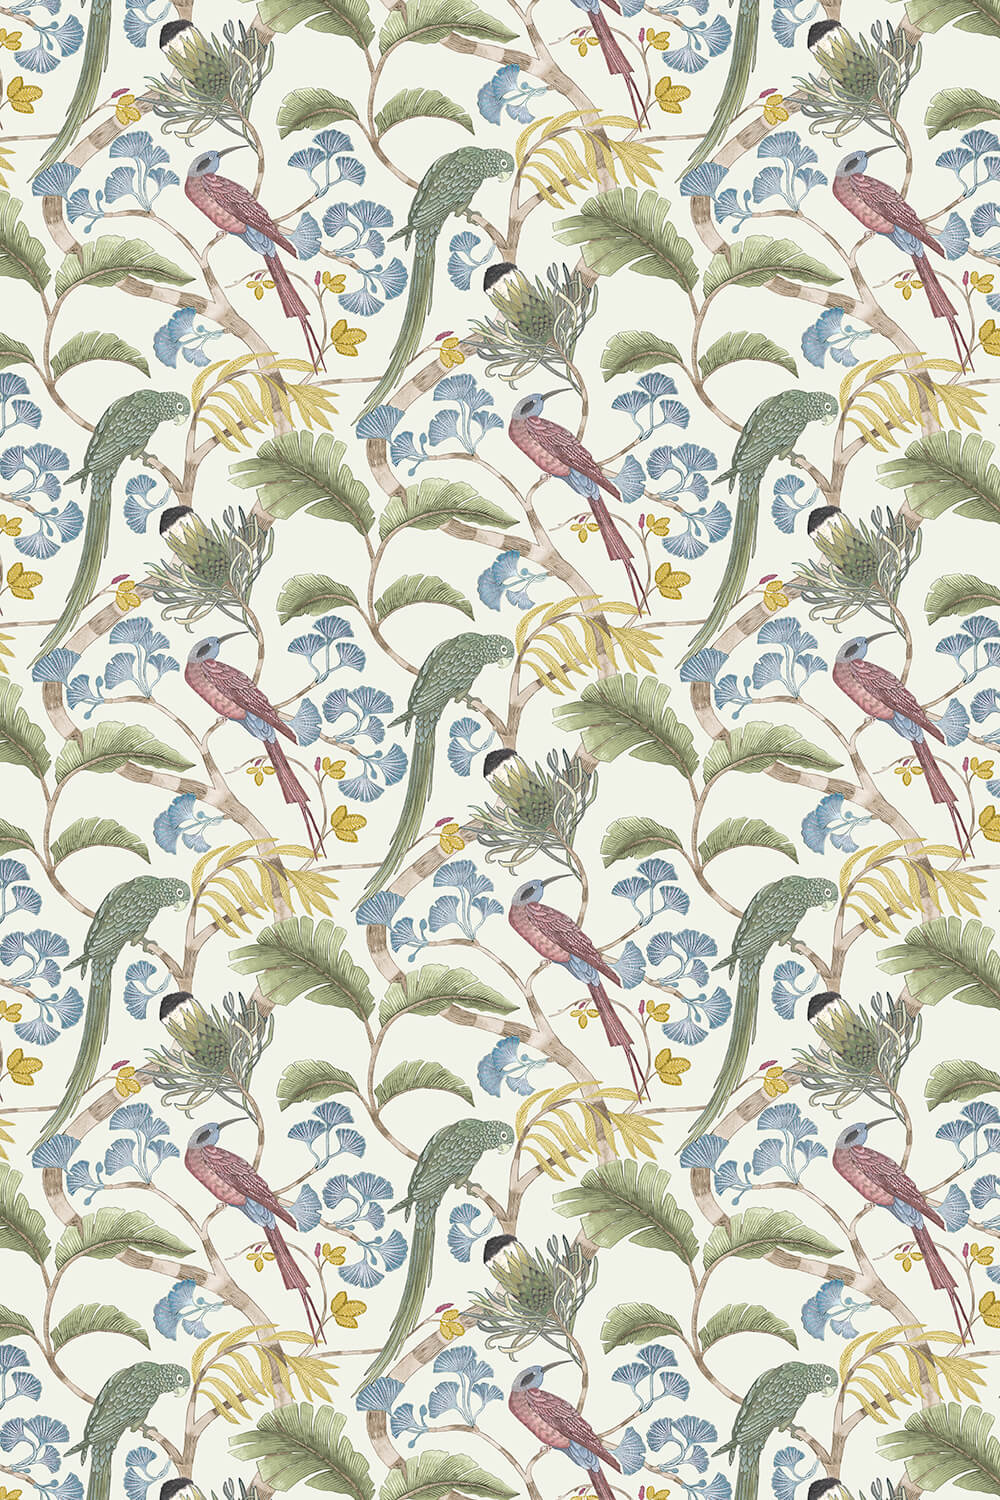 JMF-200601-PLN | Living Branches Fabric | Ivory, Soft Olive and Yellow | Flat Shot